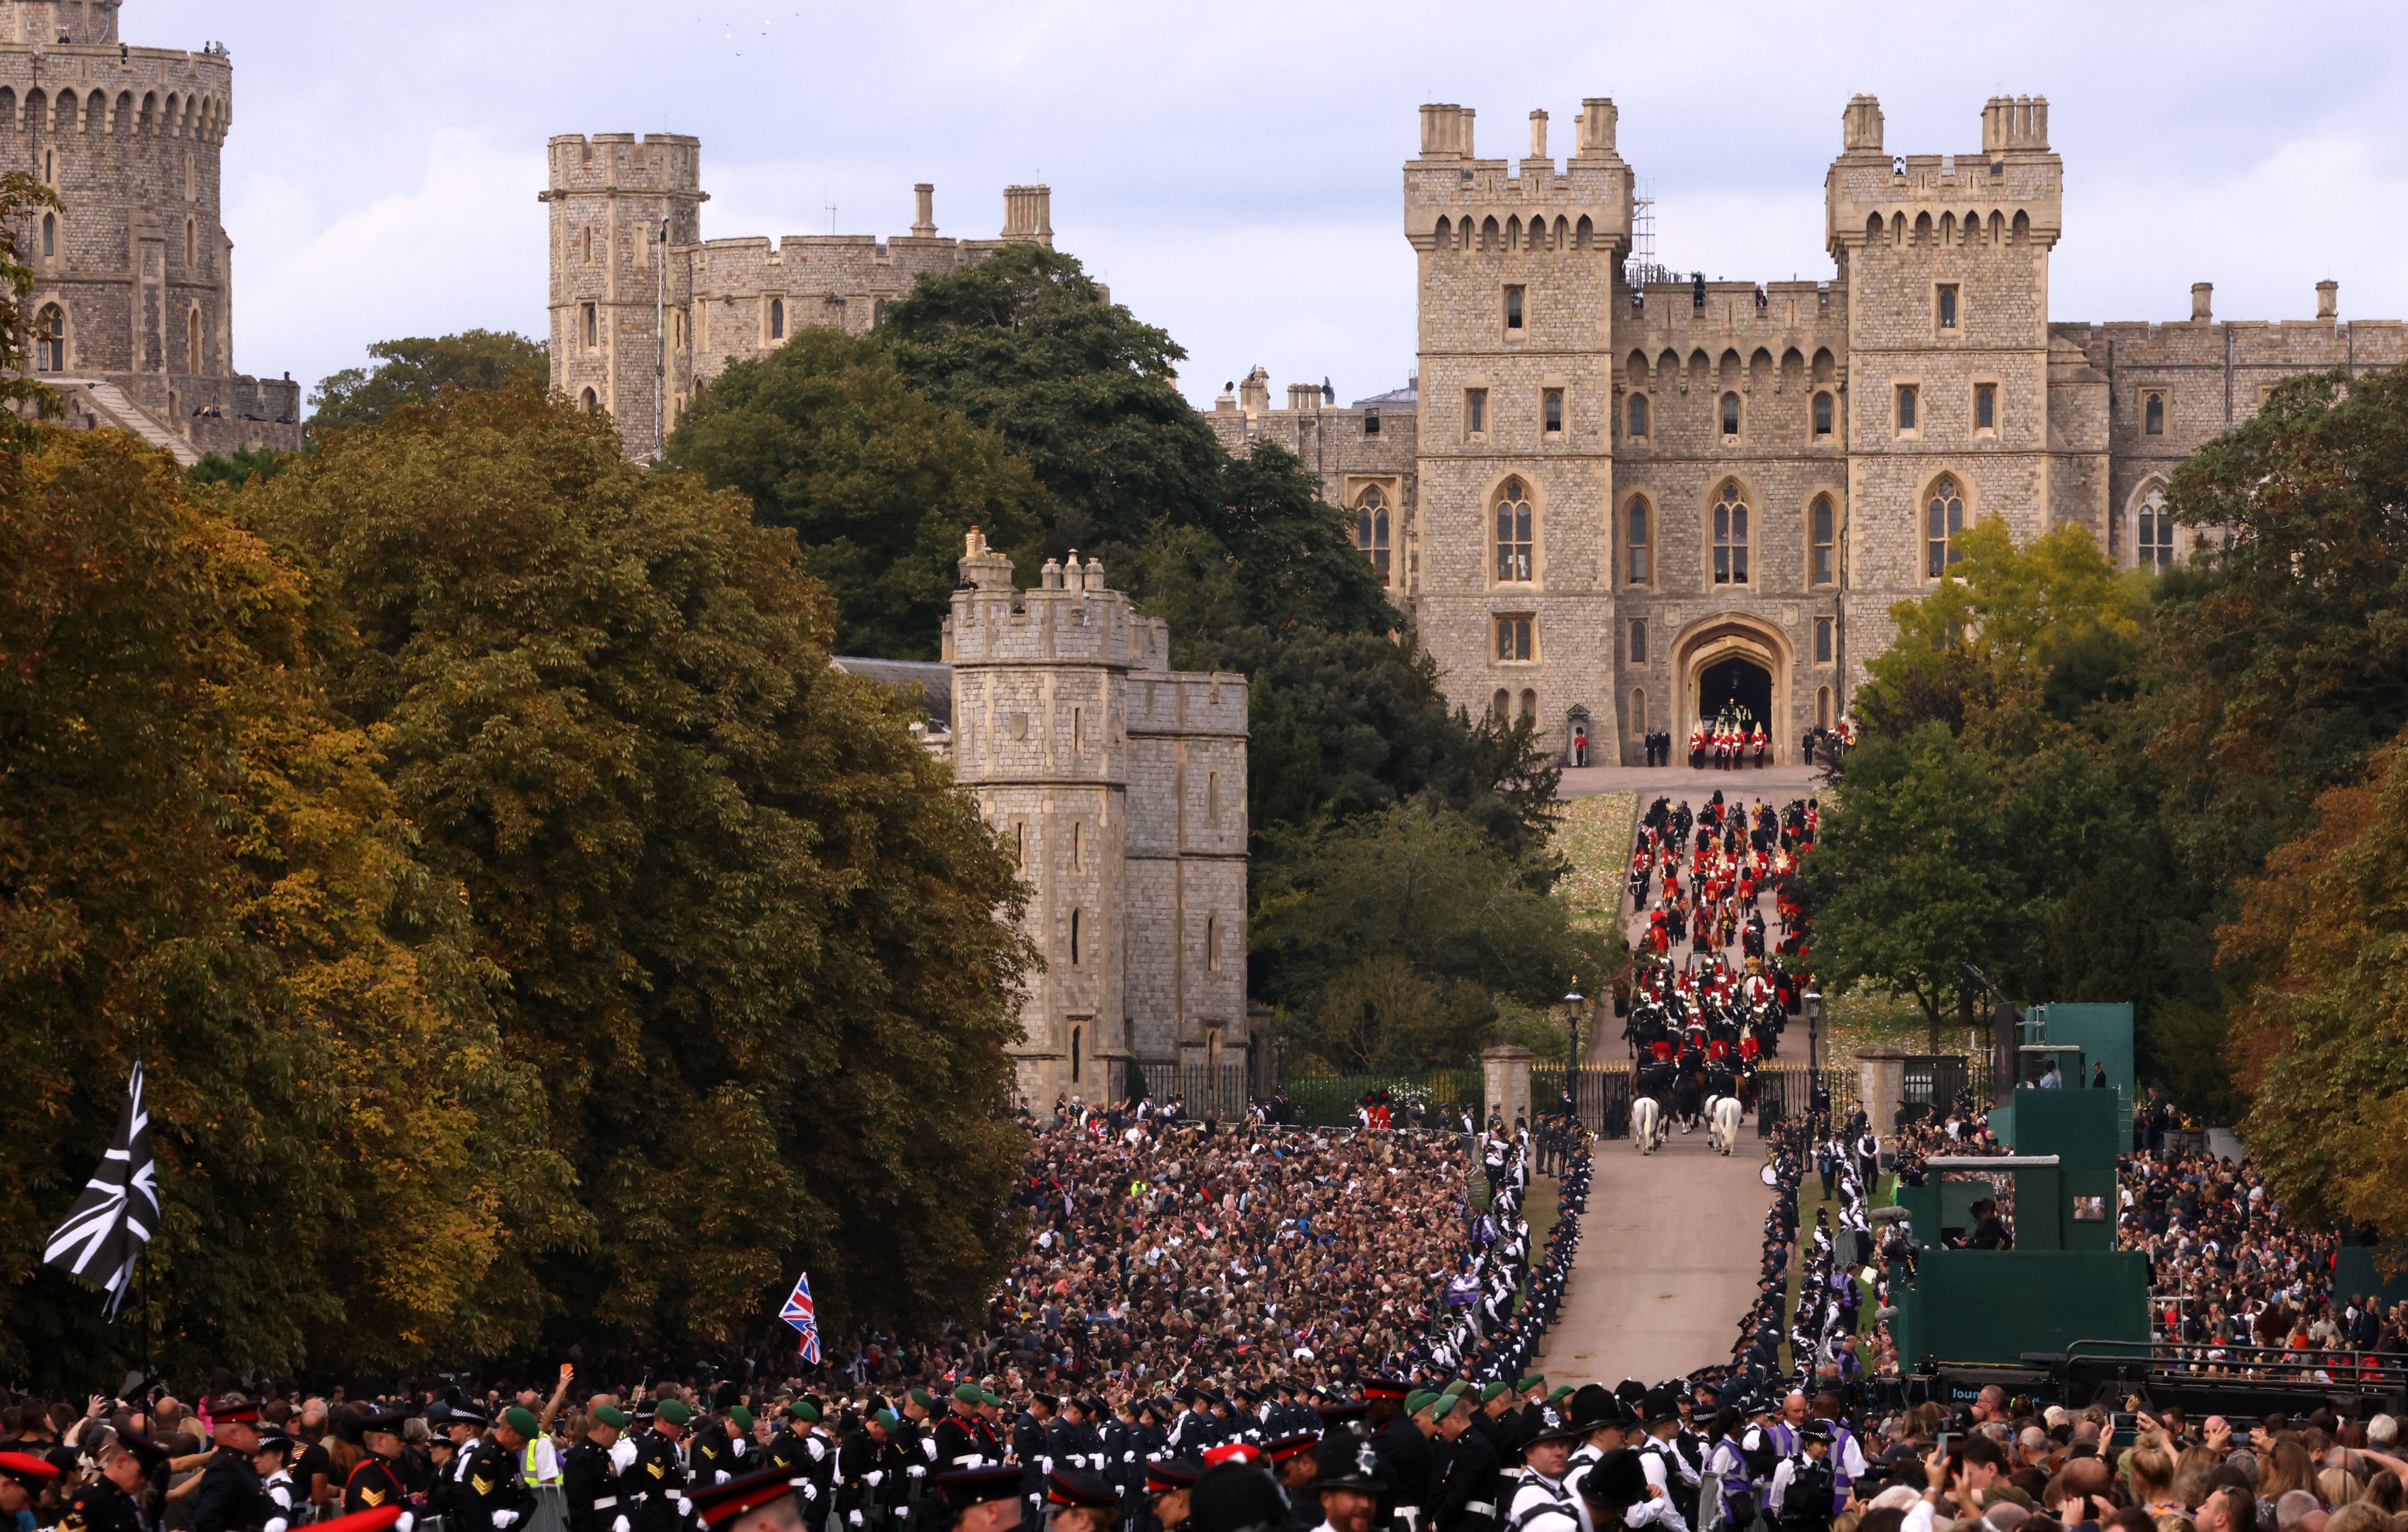 <p>The state hearse procession carrying the coffin of Queen Elizabeth II made its way to Windsor Castle in Windsor, England, after arriving from London on Sept. 19, 2022. Following a televised public committal ceremony inside St. George's Chapel on the castle's grounds, <a href="https://www.wonderwall.com/celebrity/royals/best-photos-from-queen-elizabeth-ii-funeral-king-charles-princes-william-prince-harry-george-charlotte-kate-meghan652347.gallery">the queen was interred</a> with her late husband, Prince Philip, alongside her parents and sister in a private burial attended only by the royal family.</p>